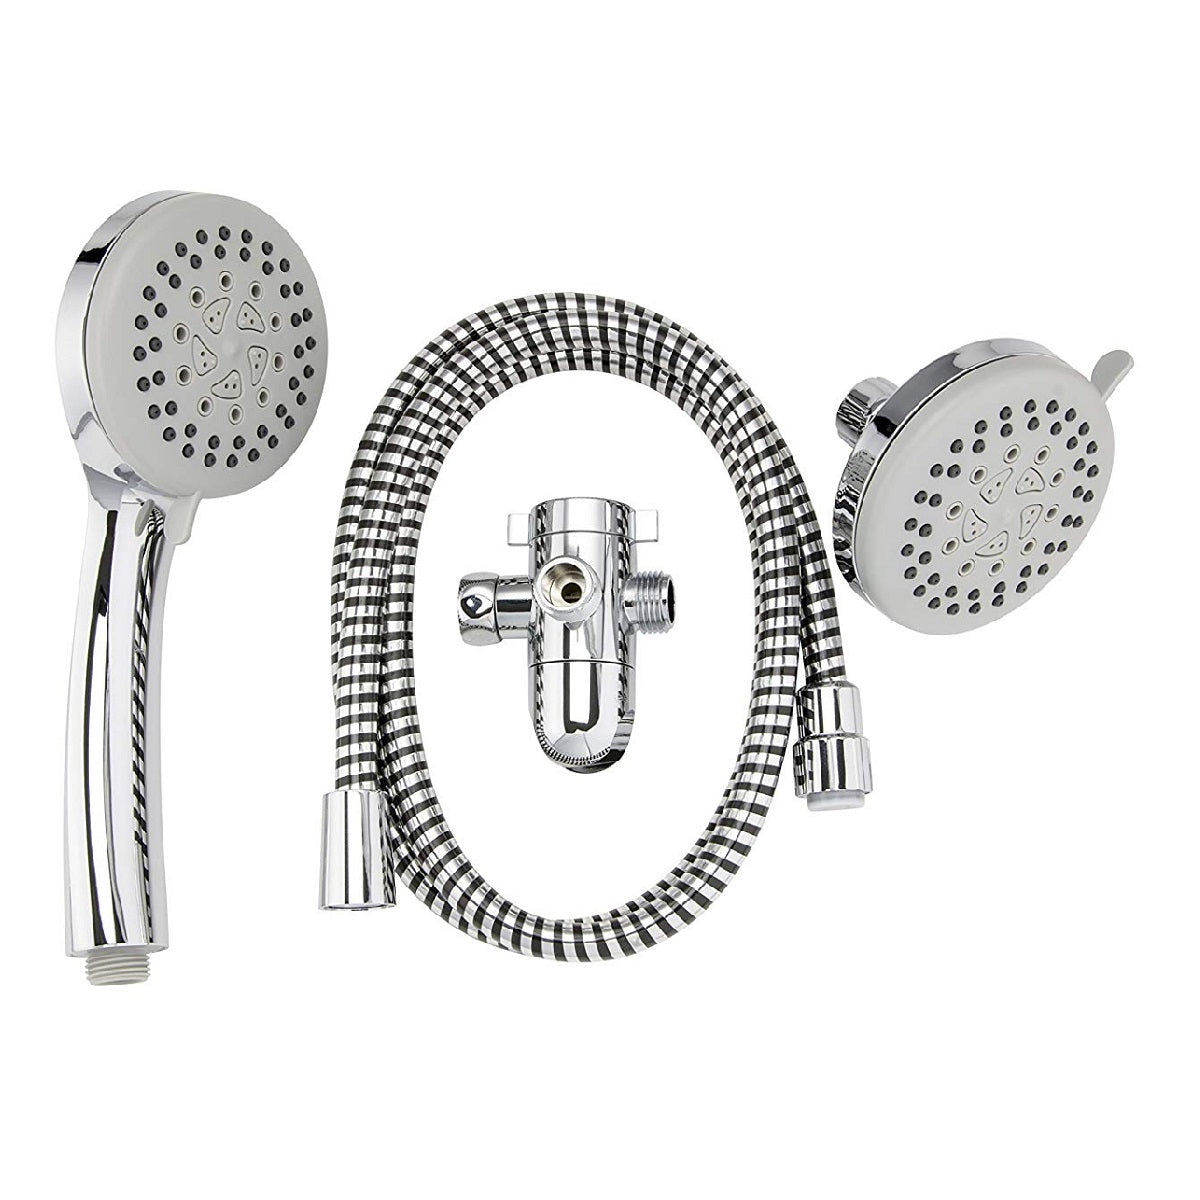 Plumb Pak K751CP Stylewise 5-Function Head and Hand Shower Kit, Polished Chrome